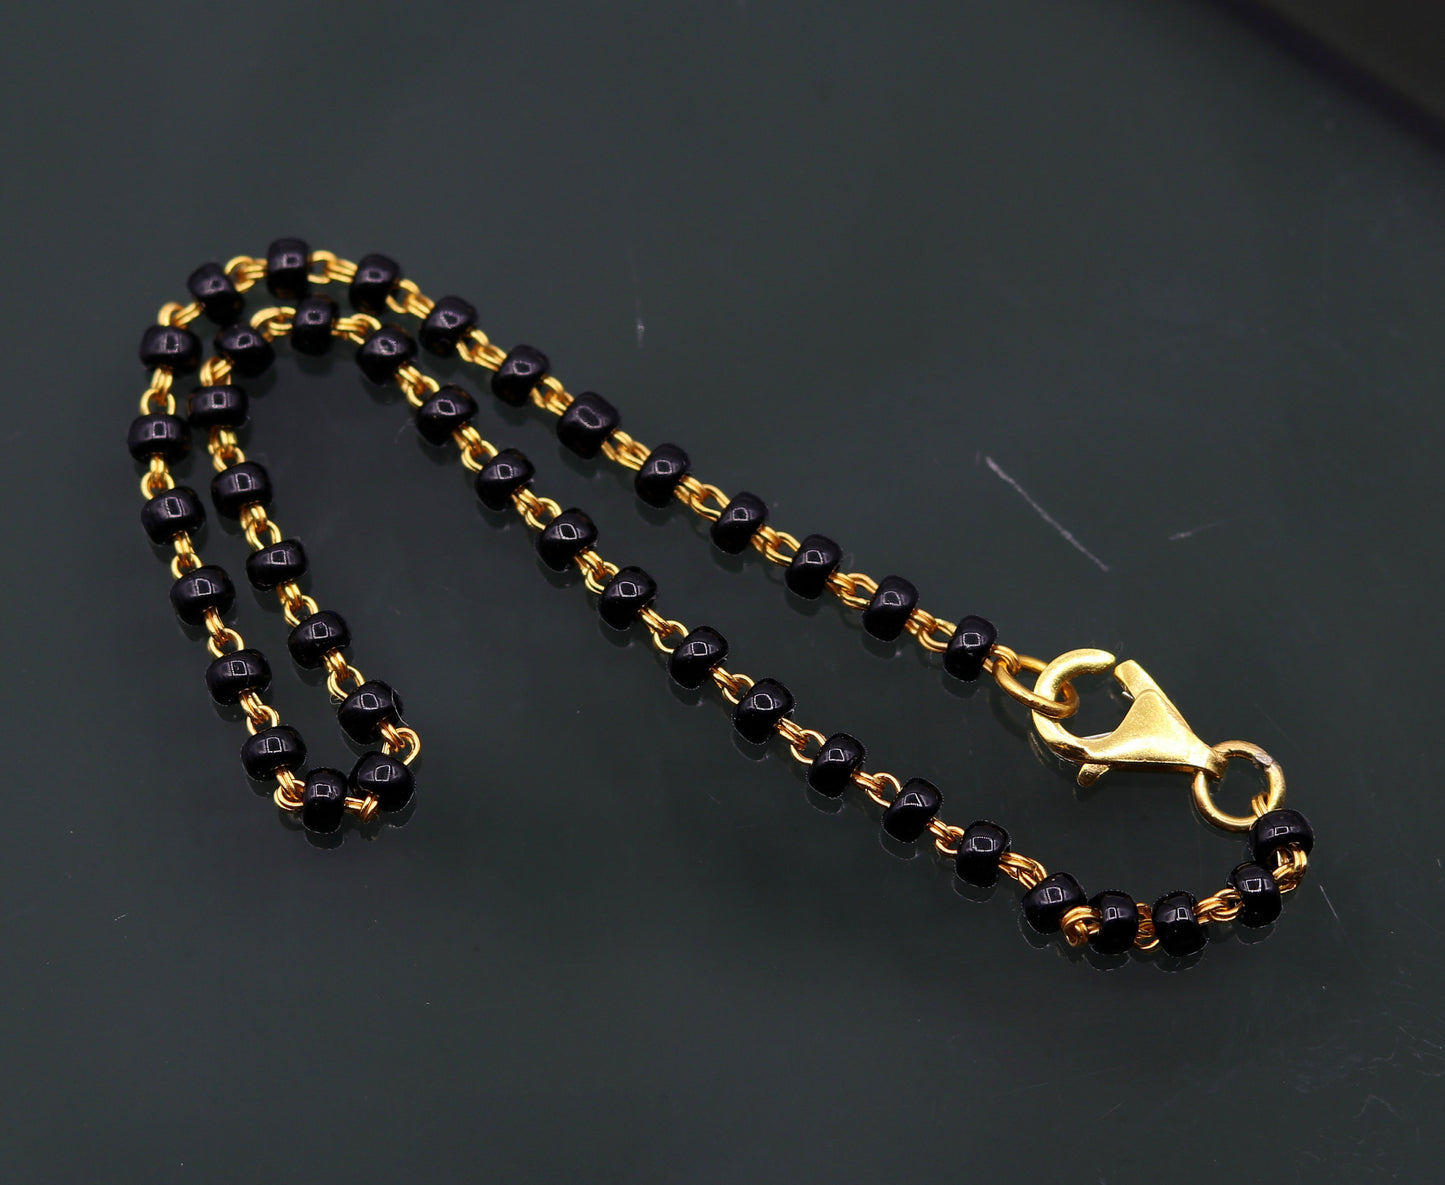 22kt yellow gold handmade fabulous black beads chain bracelet,gorgeous beads bracelet for gifting light weight jewelry - TRIBAL ORNAMENTS